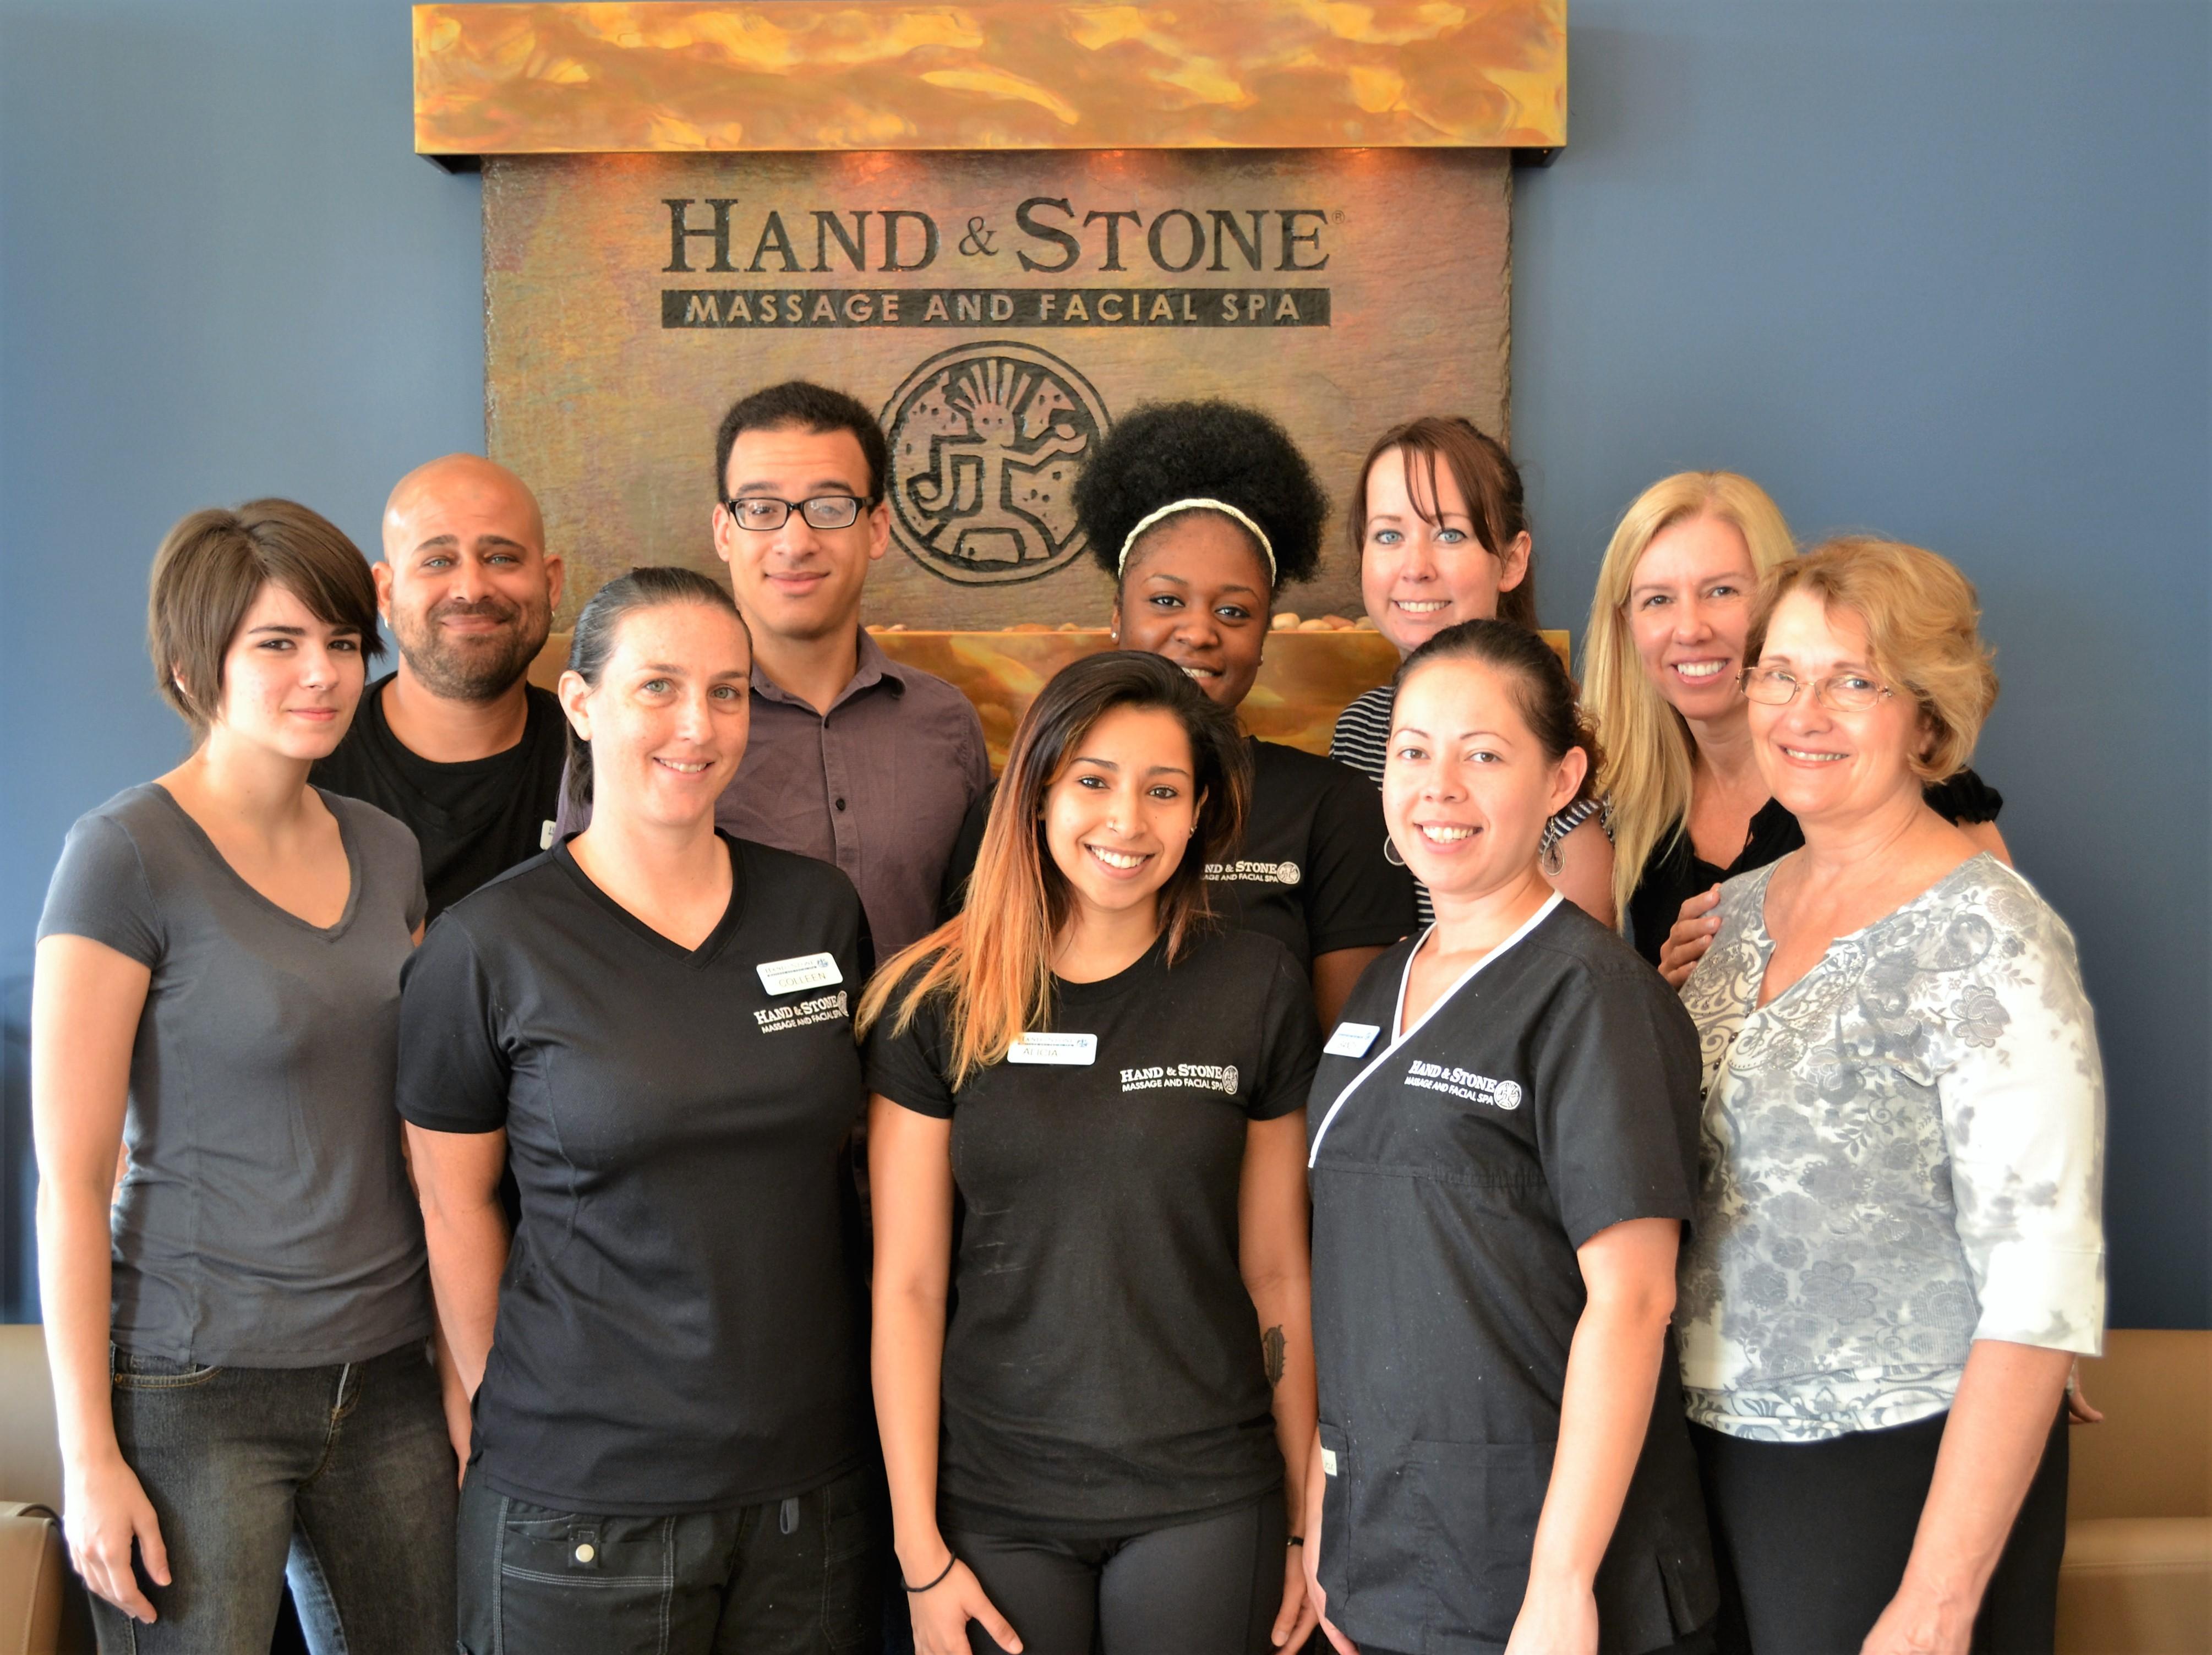 Davie Fl Classic Facial Classic Facial Davie Fl Hand And Stone Massage And Facial Spa